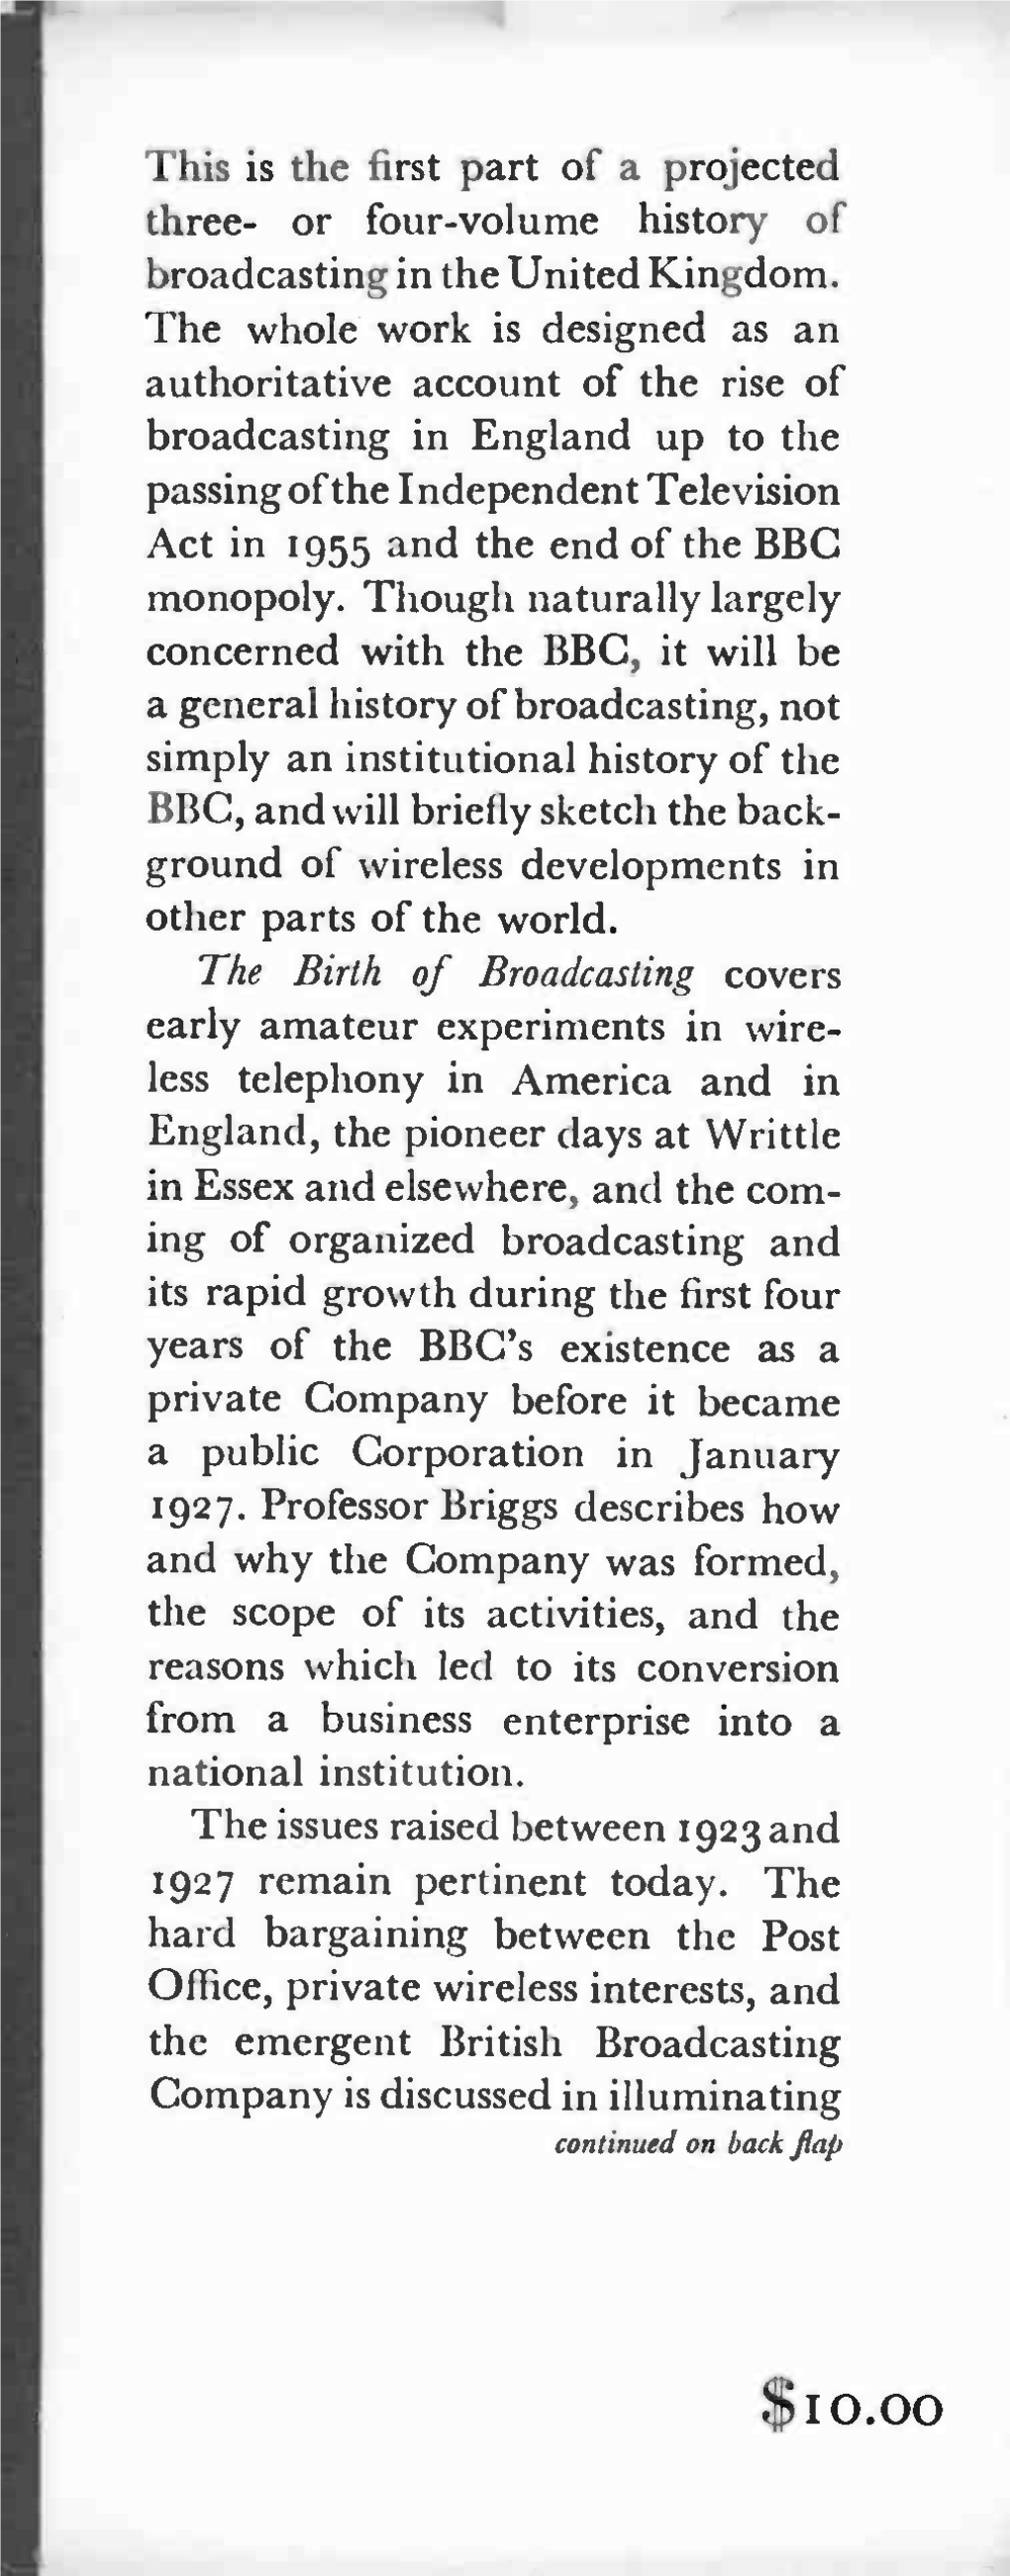 The Birth of Broadcasting (1961)